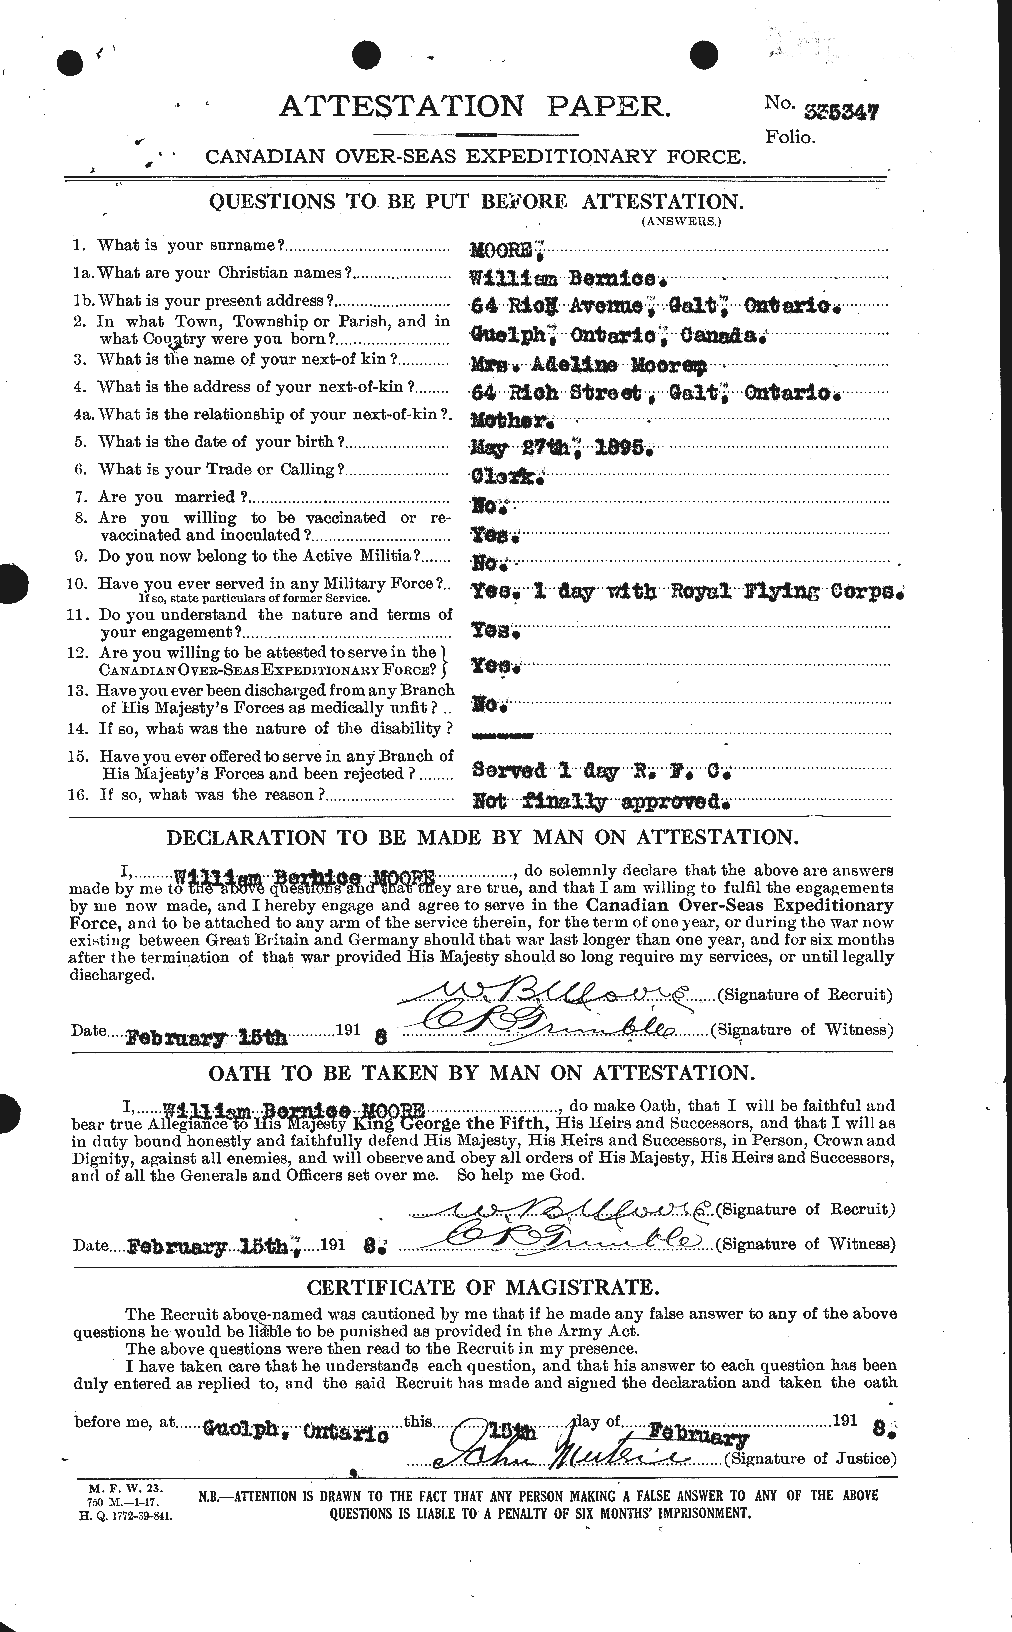 Personnel Records of the First World War - CEF 505780a